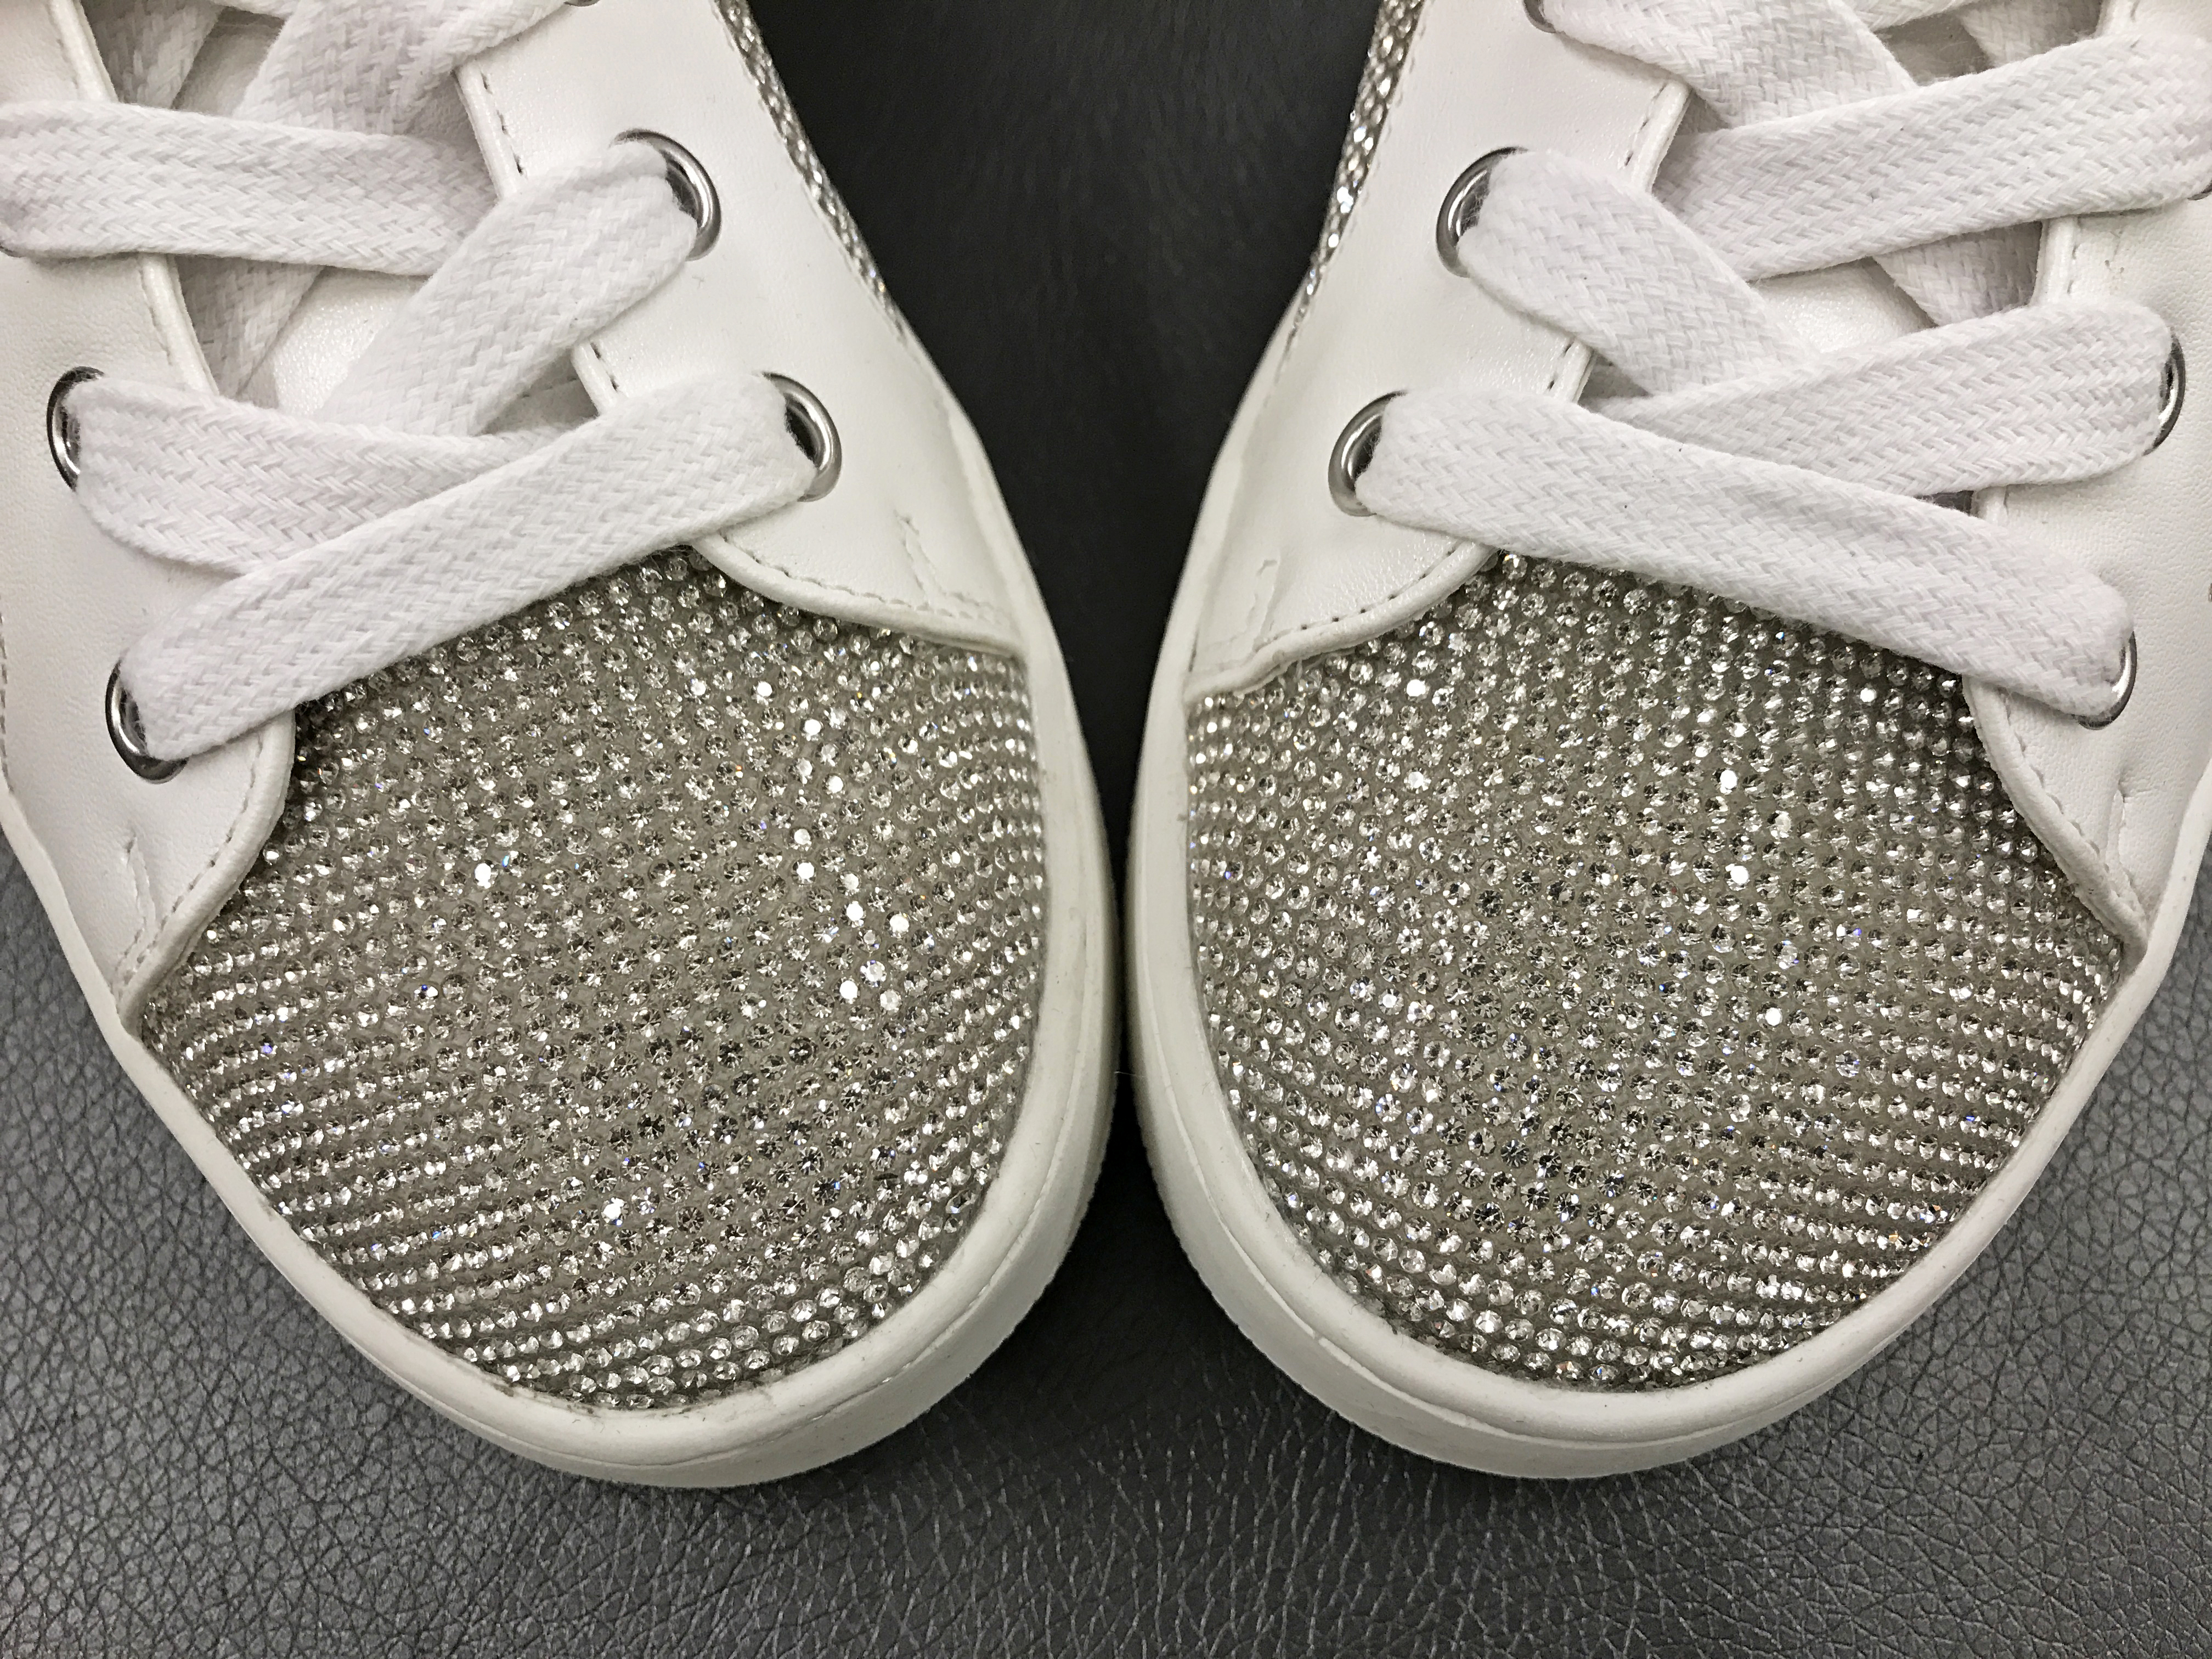 How To Put Rhinestones On Clothes?